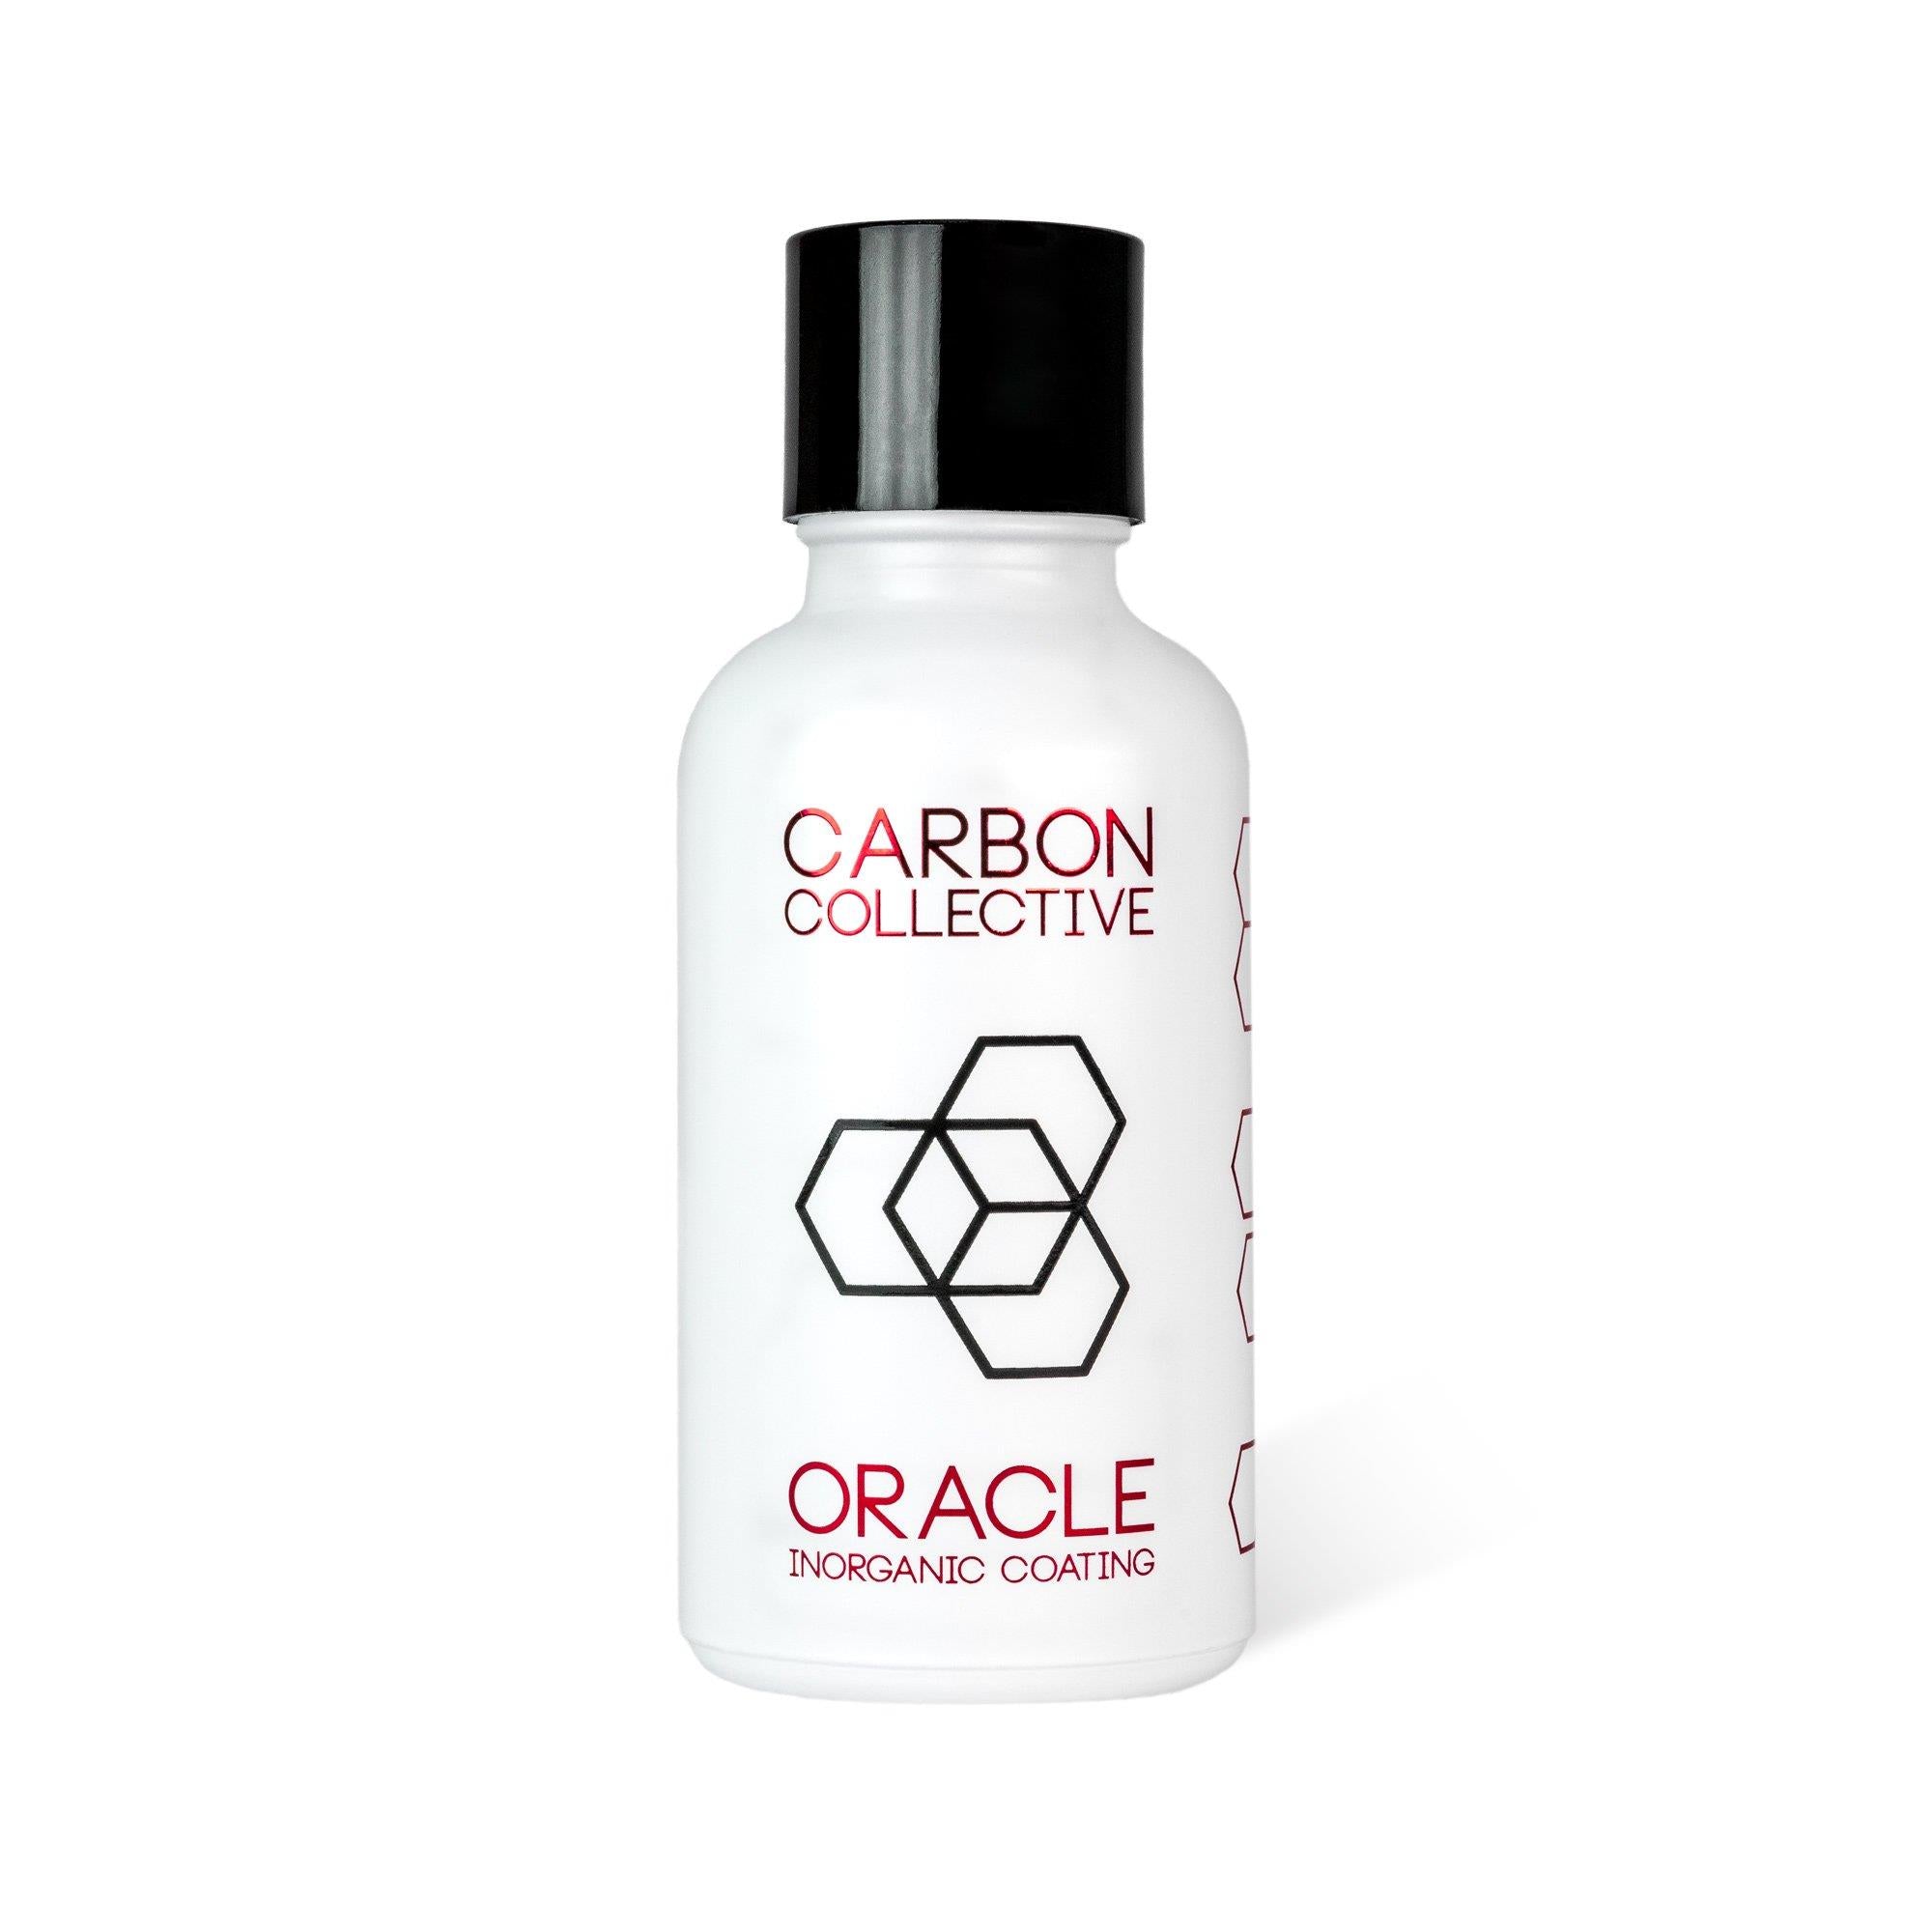 Carbon Collective Oracle Inorganic Paint Coating Kit